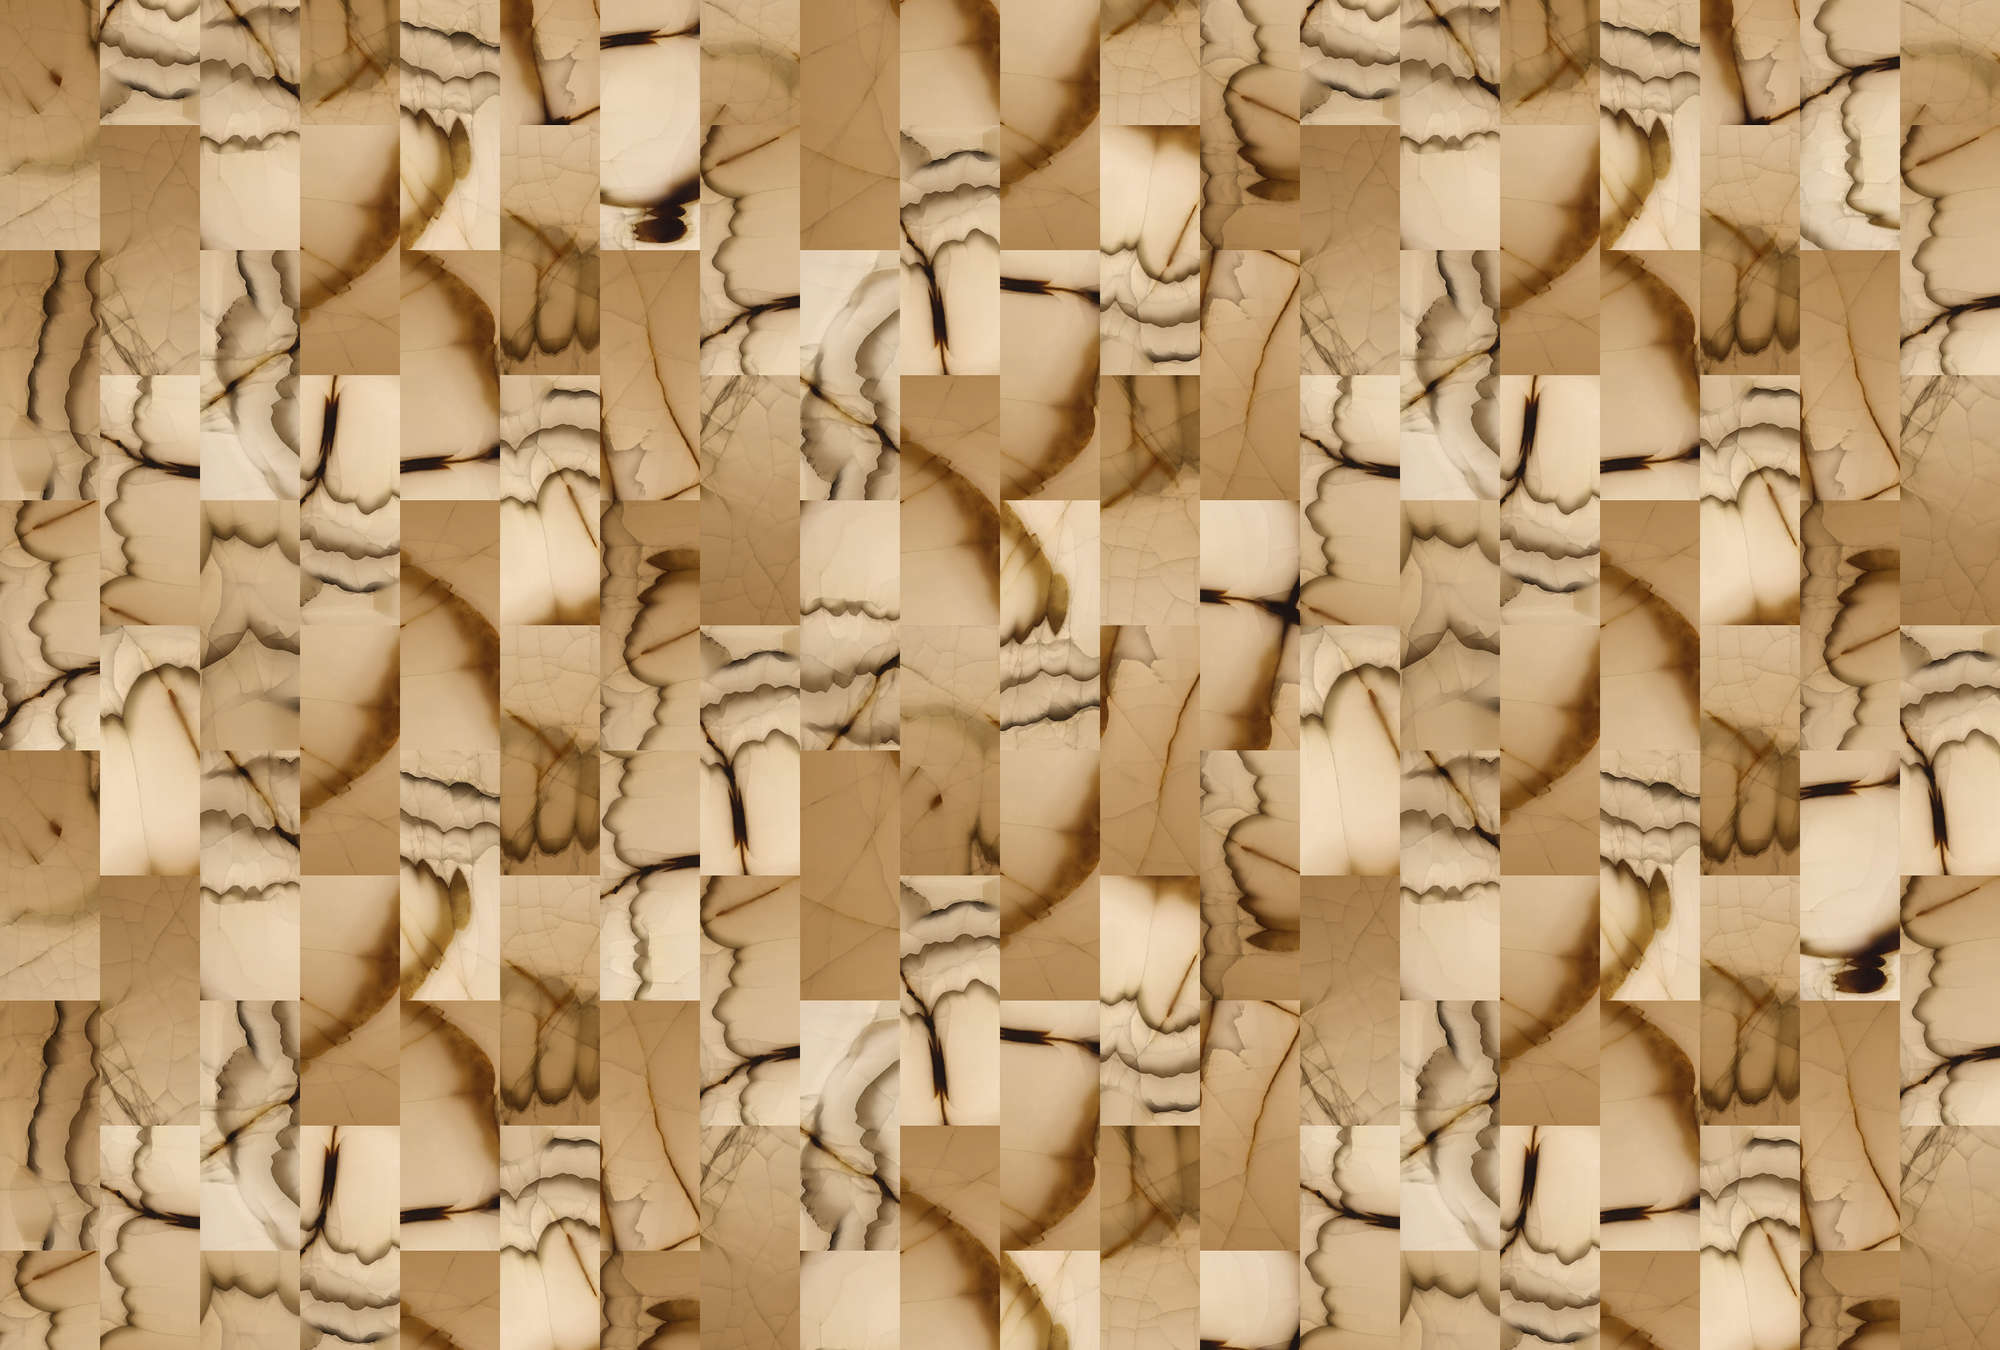             Cut stone 1 - Photo wallpaper with stone look abstract - Beige, Brown | Premium smooth fleece
        